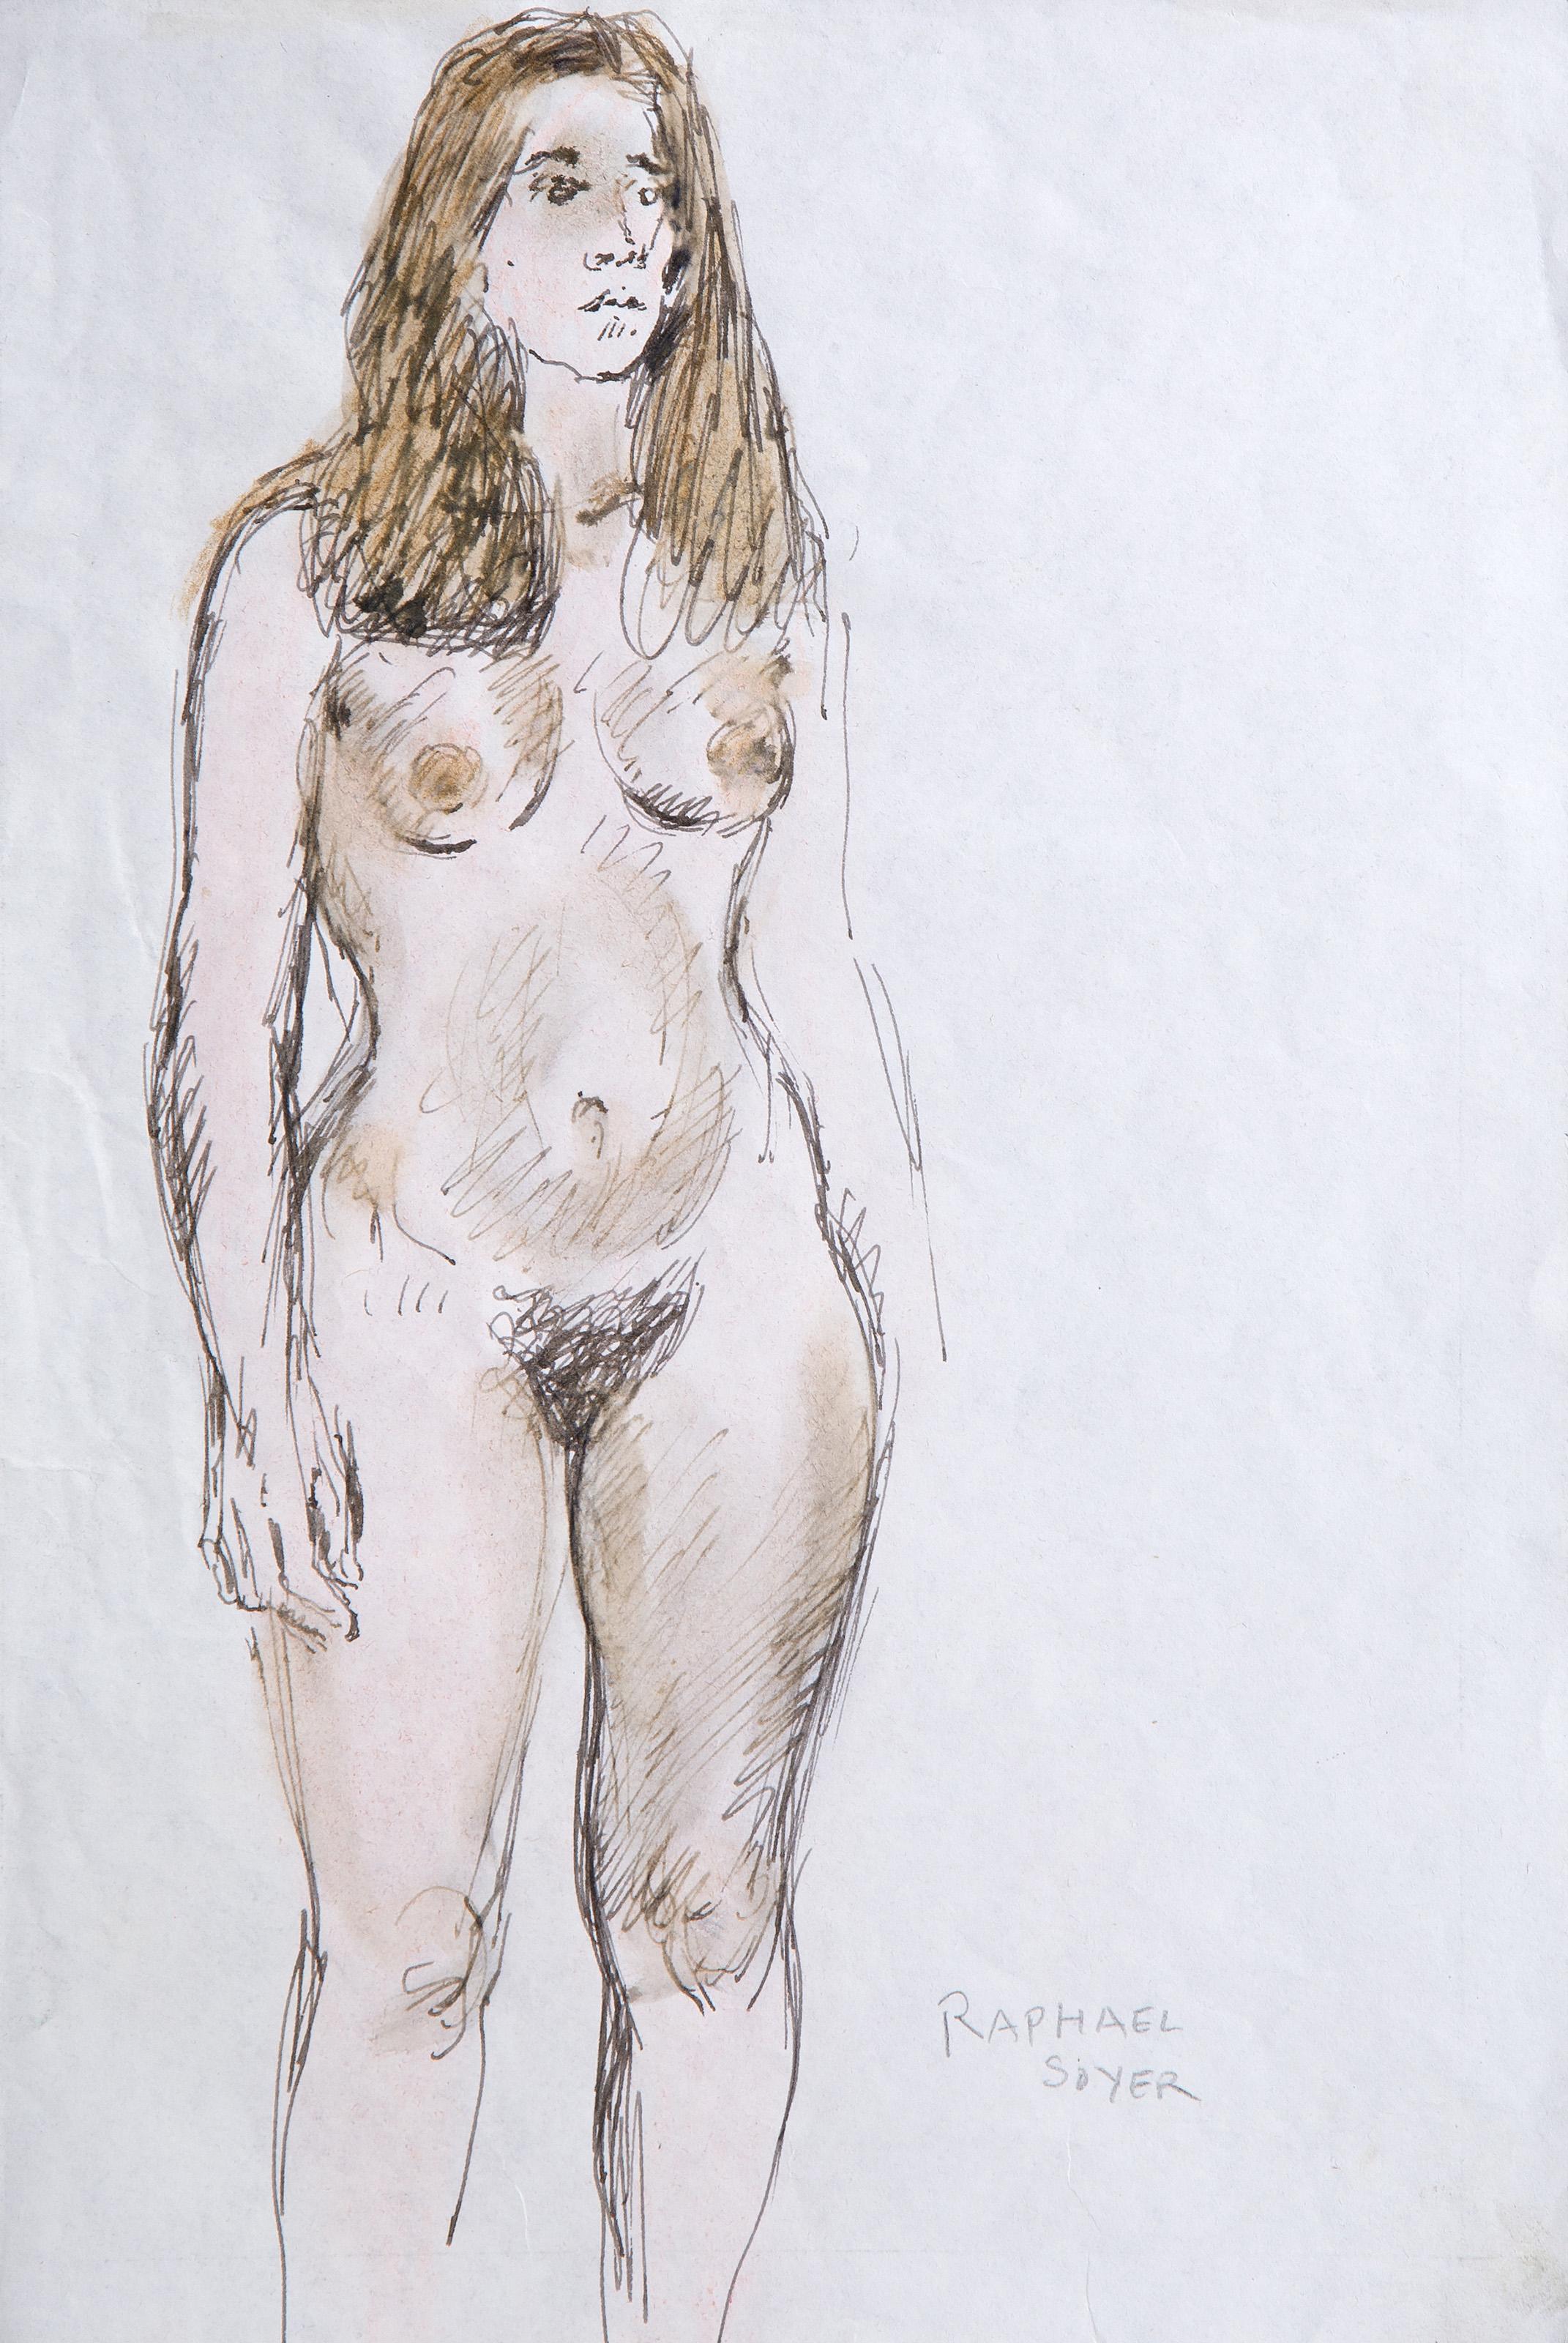 Raphael Soyer, Russian/American (1899 - 1987) -  Nude Study I. Medium: Ink and Watercolor, signed in pencil, Size: 11.5 x 8 in. (29.21 x 20.32 cm) 